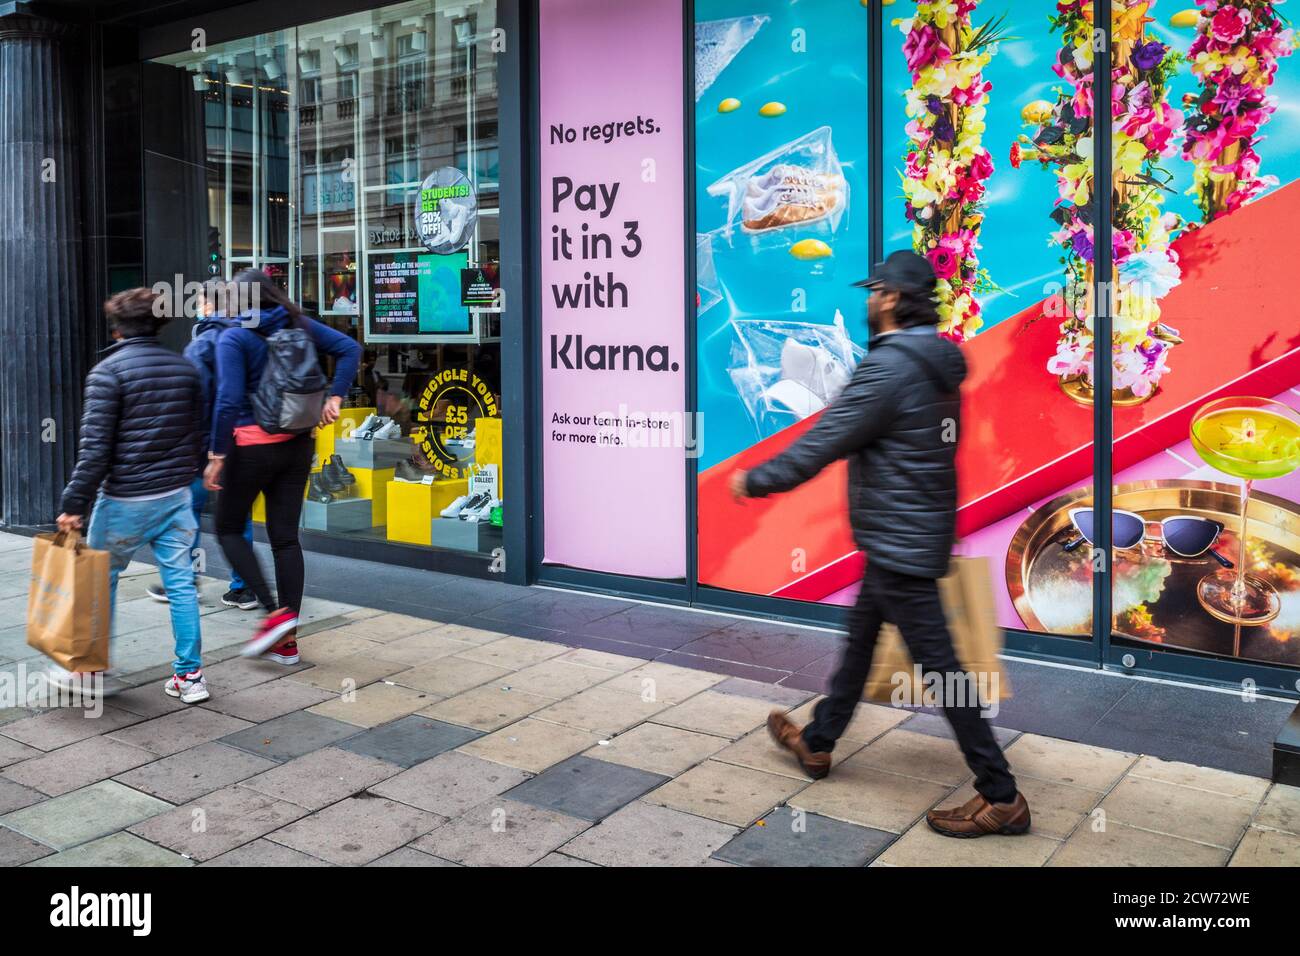 Klarna credit payment scheme. Advertising Klarna available in a store on London Oxford St. Klarna is a buy now pay later system popular with the young Stock Photo